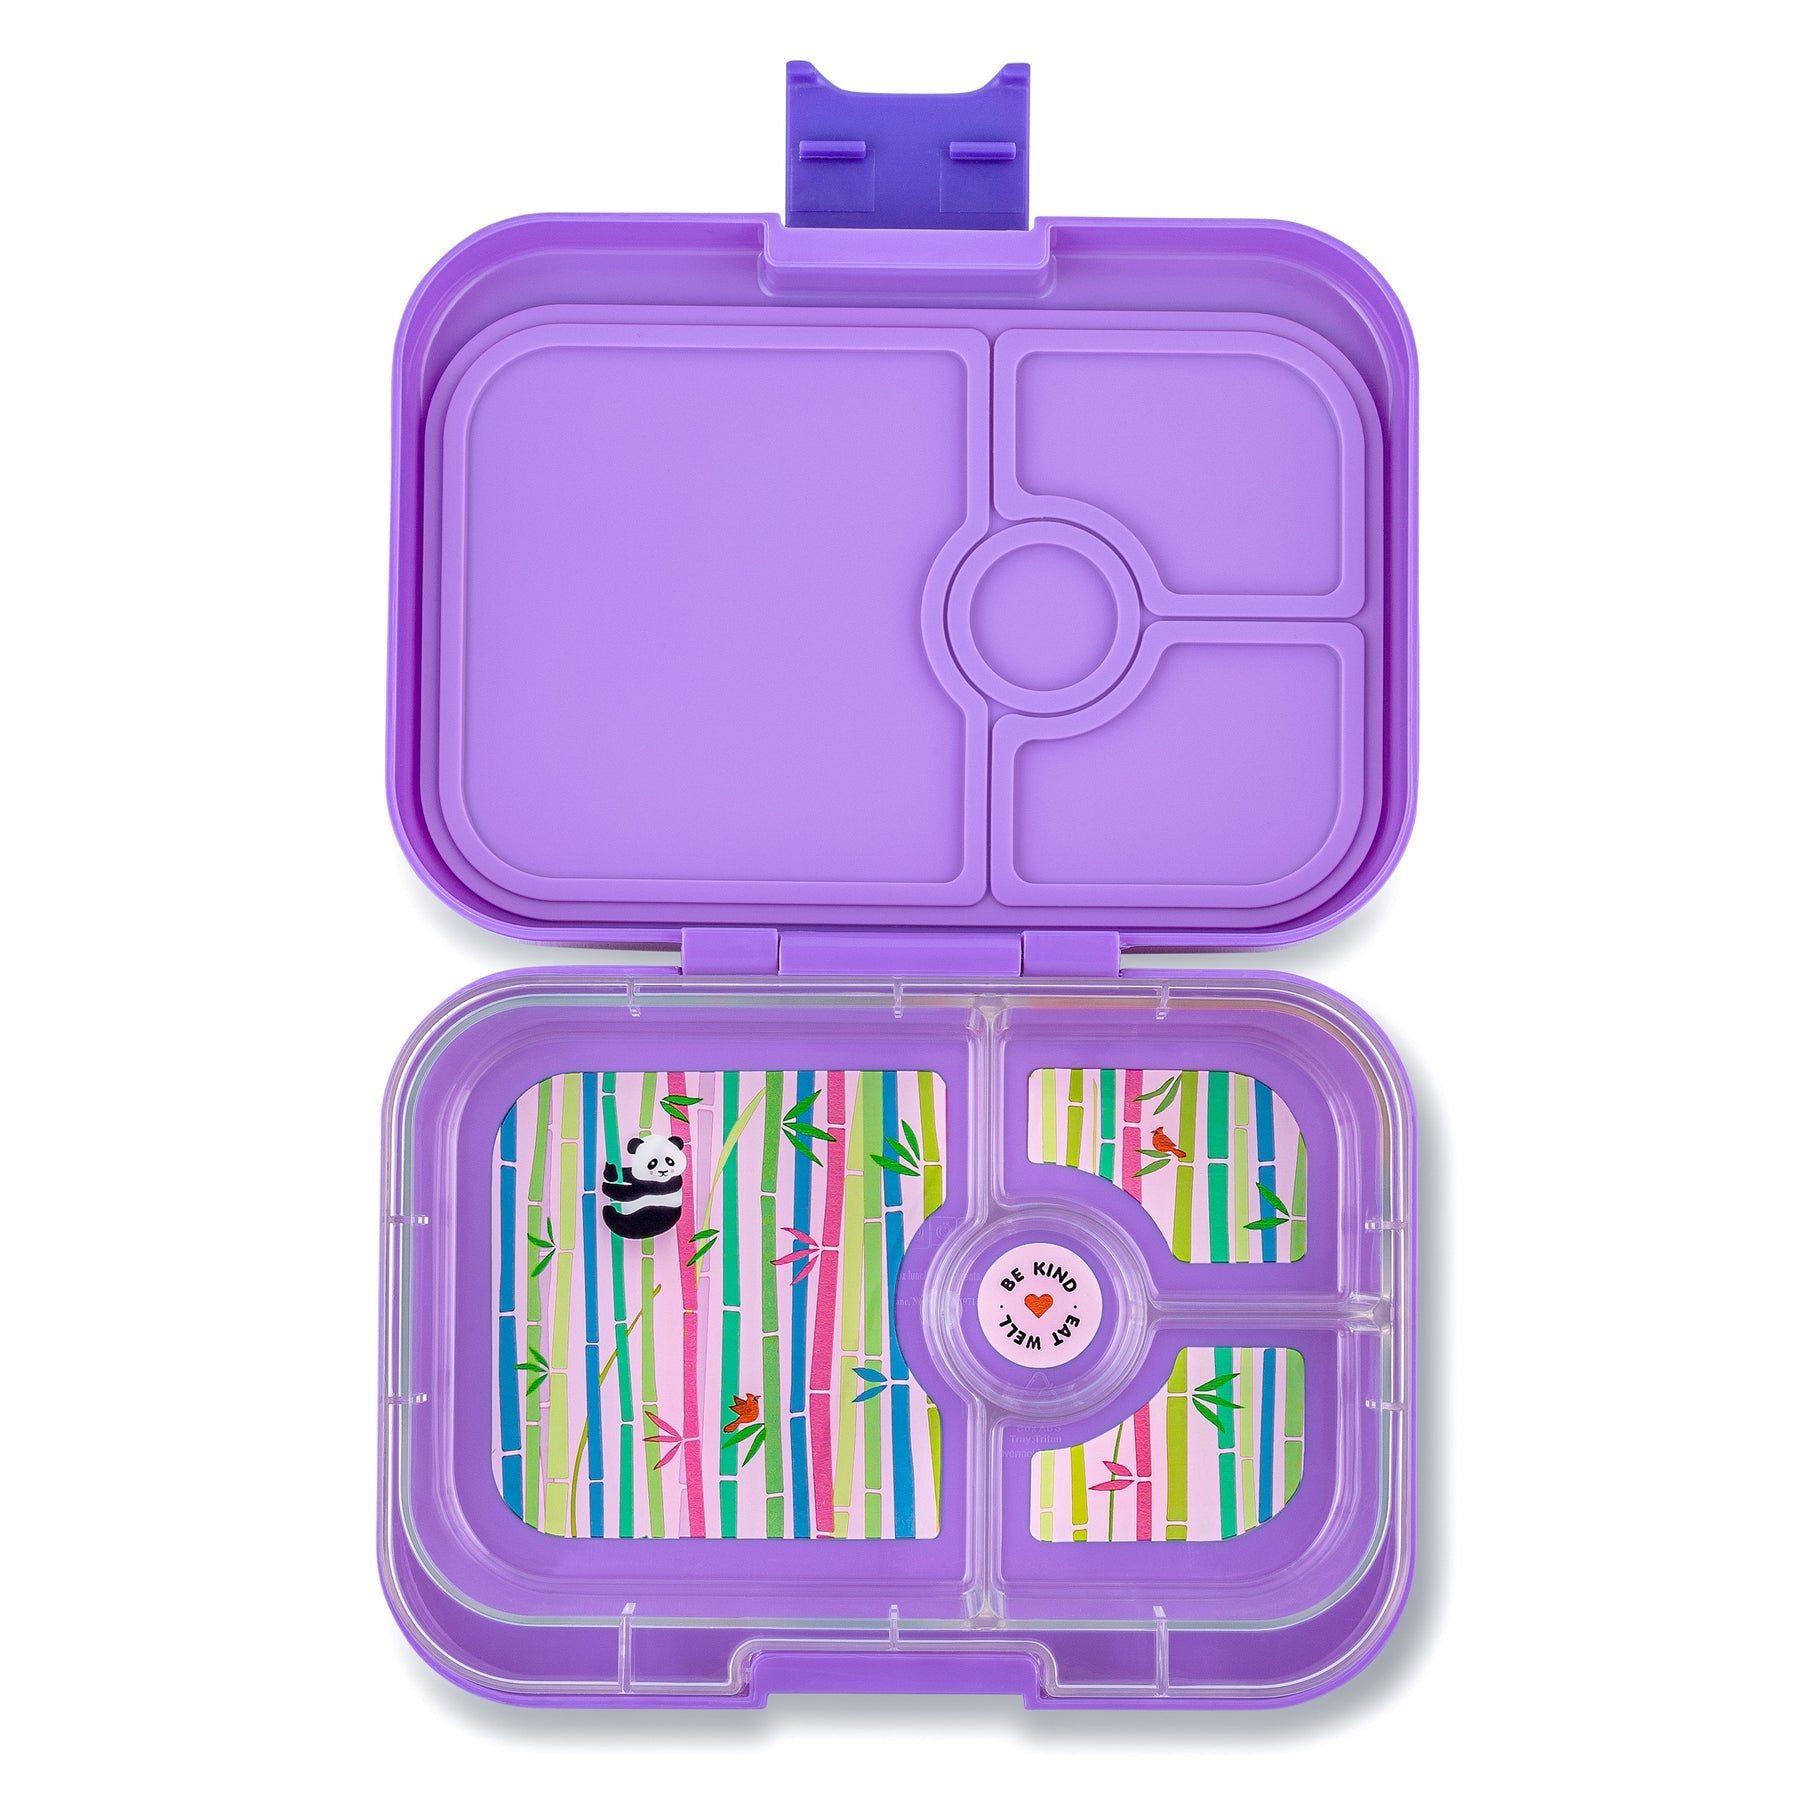 Yumbox Tapas Groovy Antibes Blue 4C Tray - Largest Size